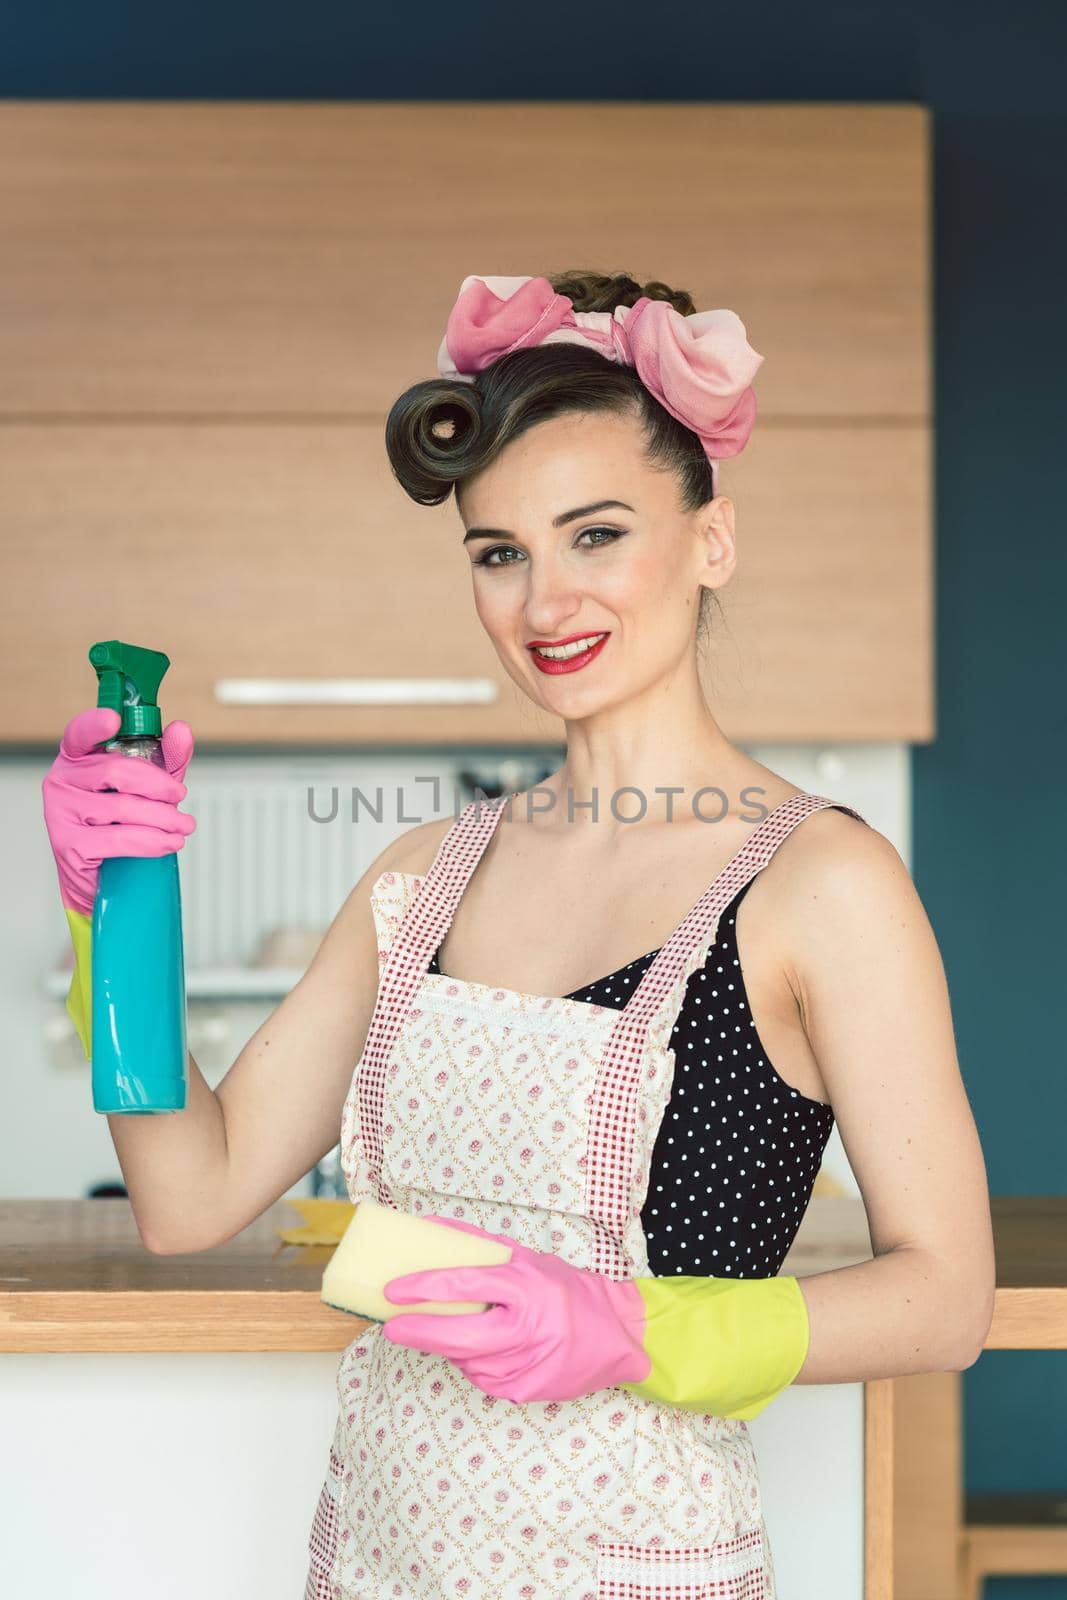 Cheerful housewife cleaning the kitchen by Kzenon